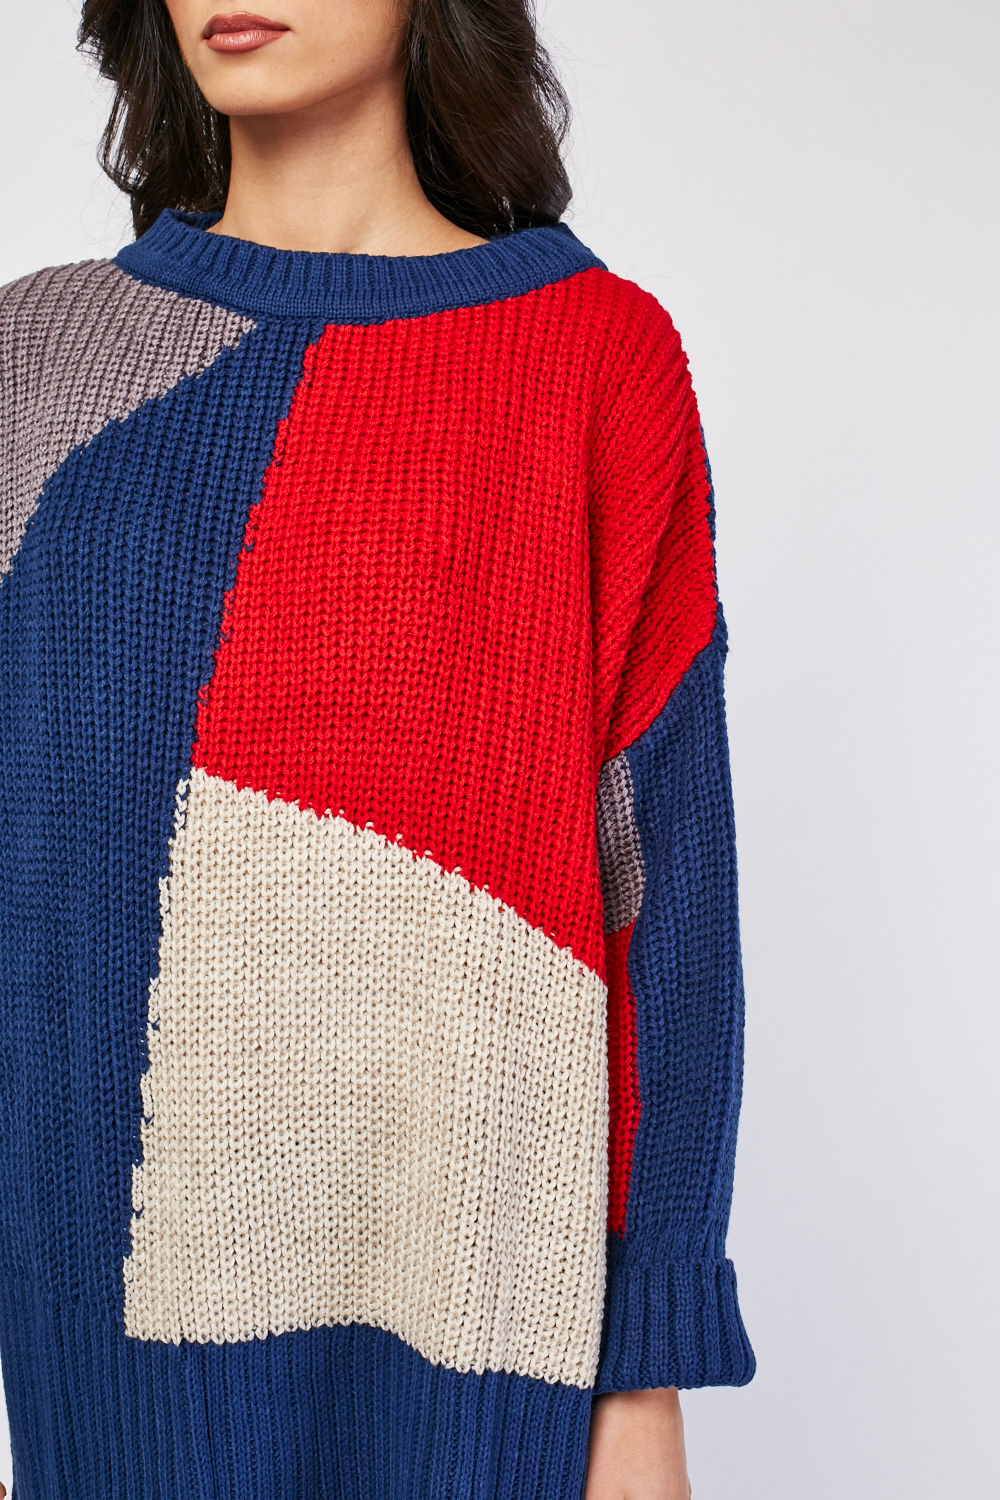 Colour Block Chunky Knit Jumper - Just $7